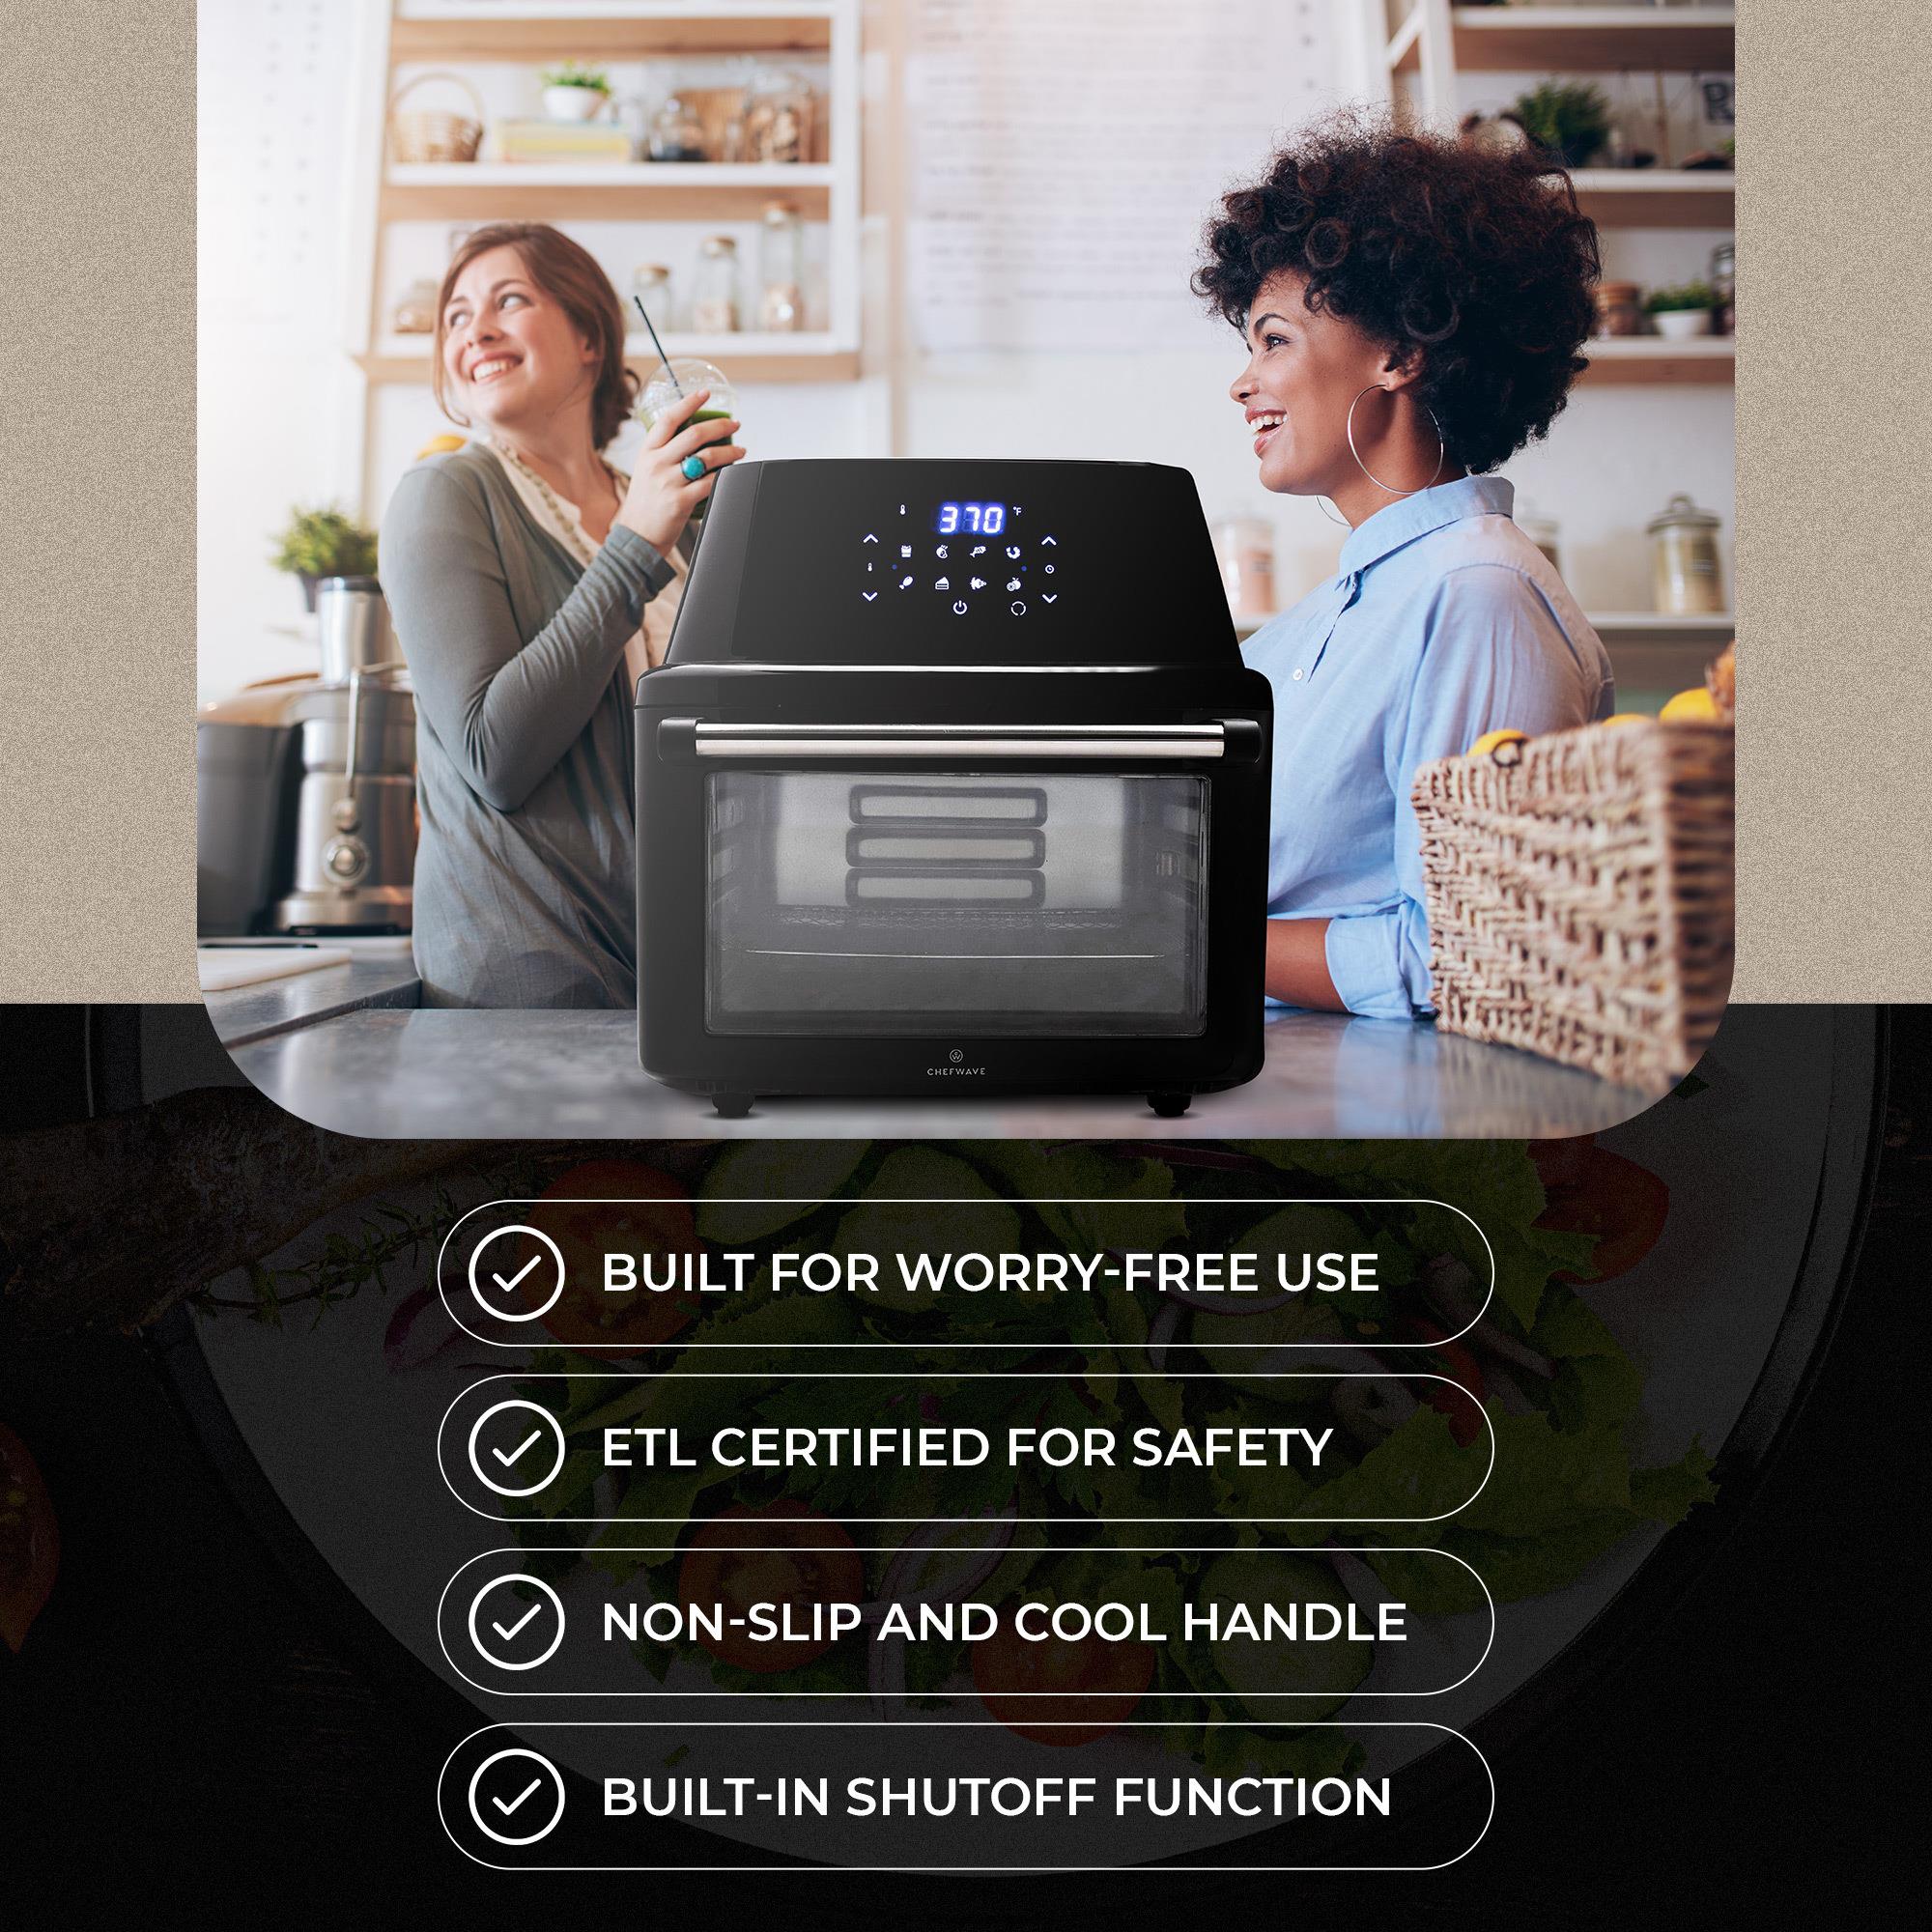 ChefWave Magma 16 qt. Multifunctional Air Fryer Oven with Rotisserie, Dehydrator and Accessories - image 3 of 13